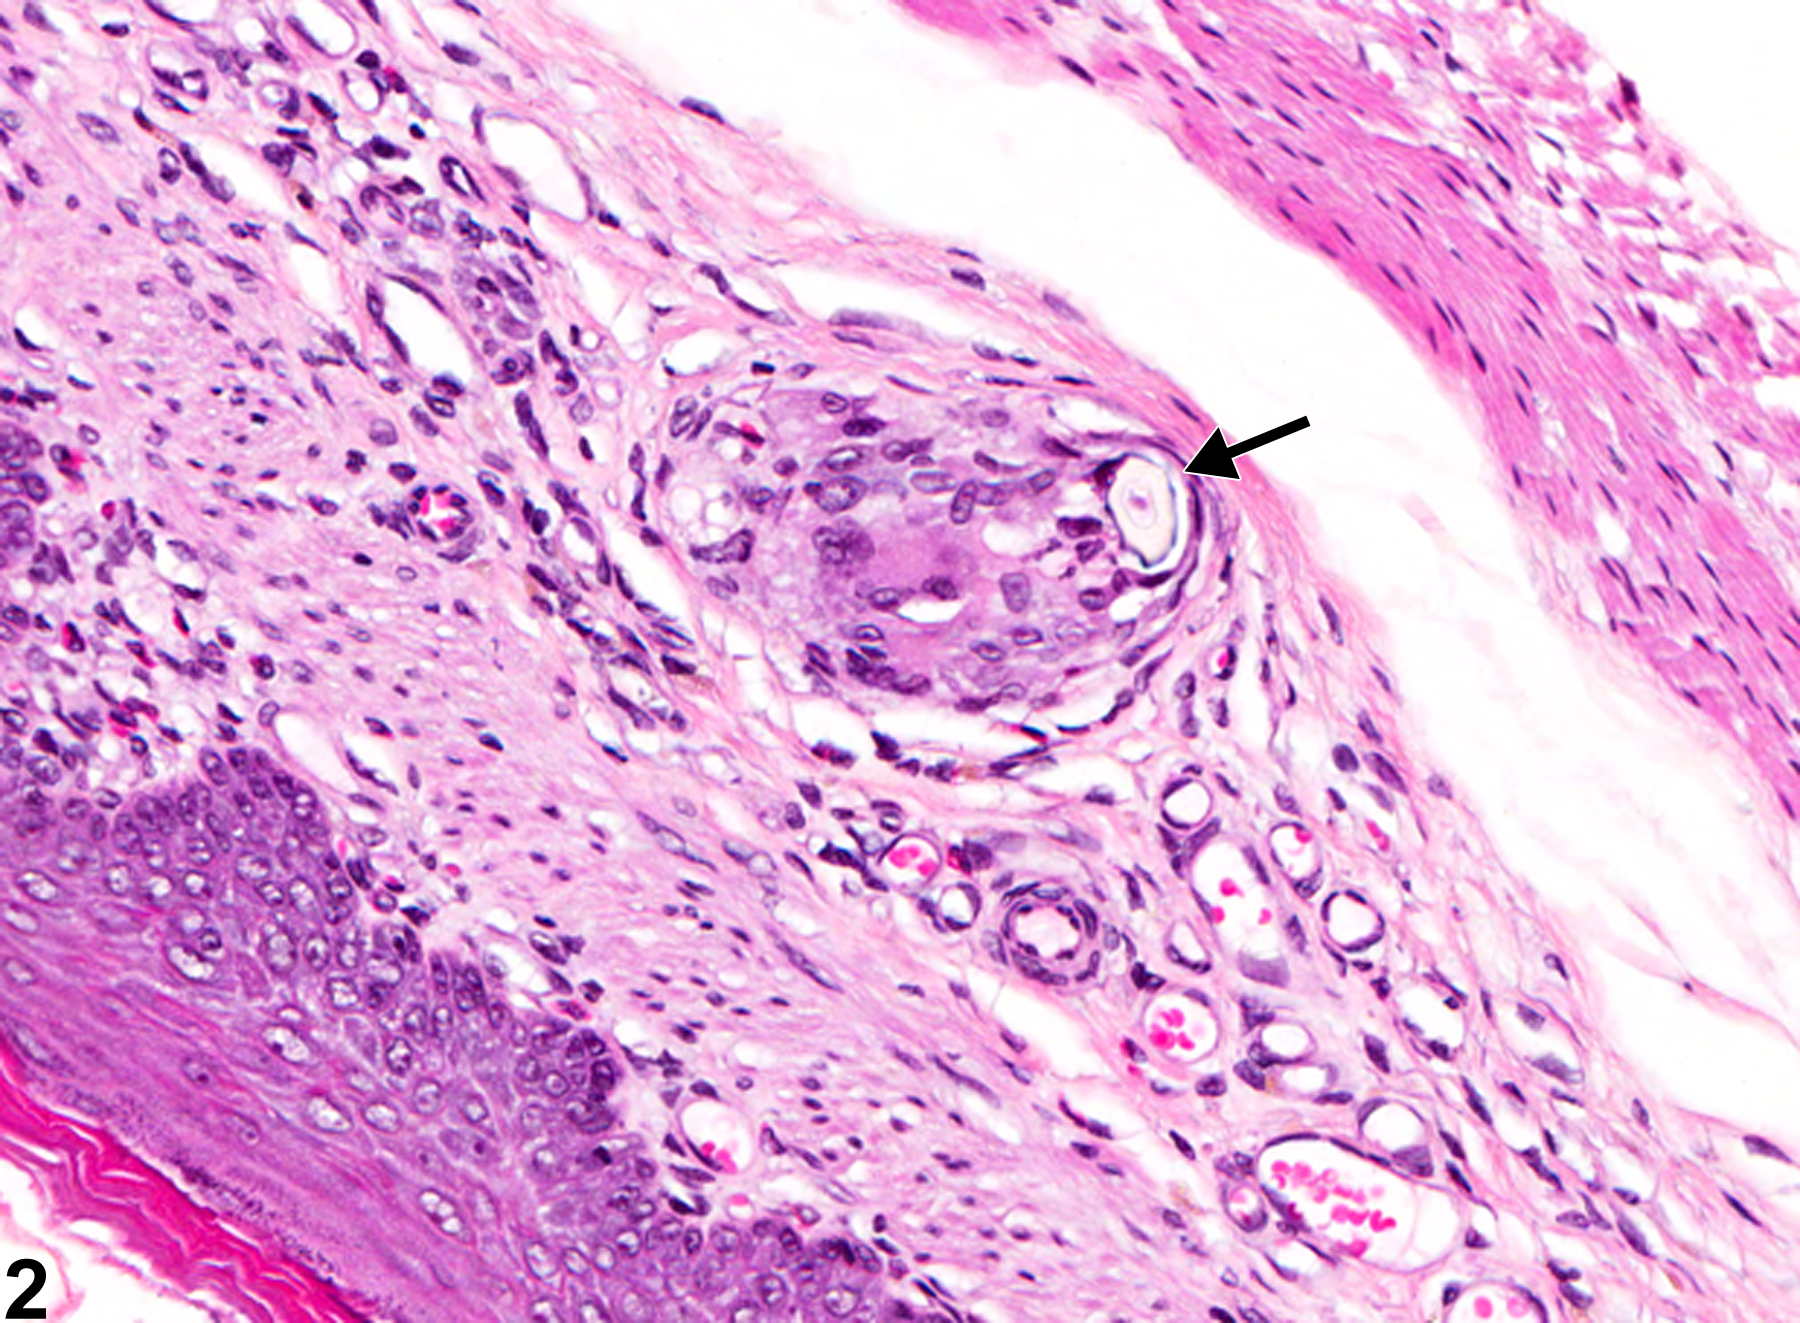 Image of foreign body in the forestomach from a male F344/N rat in a chronic study